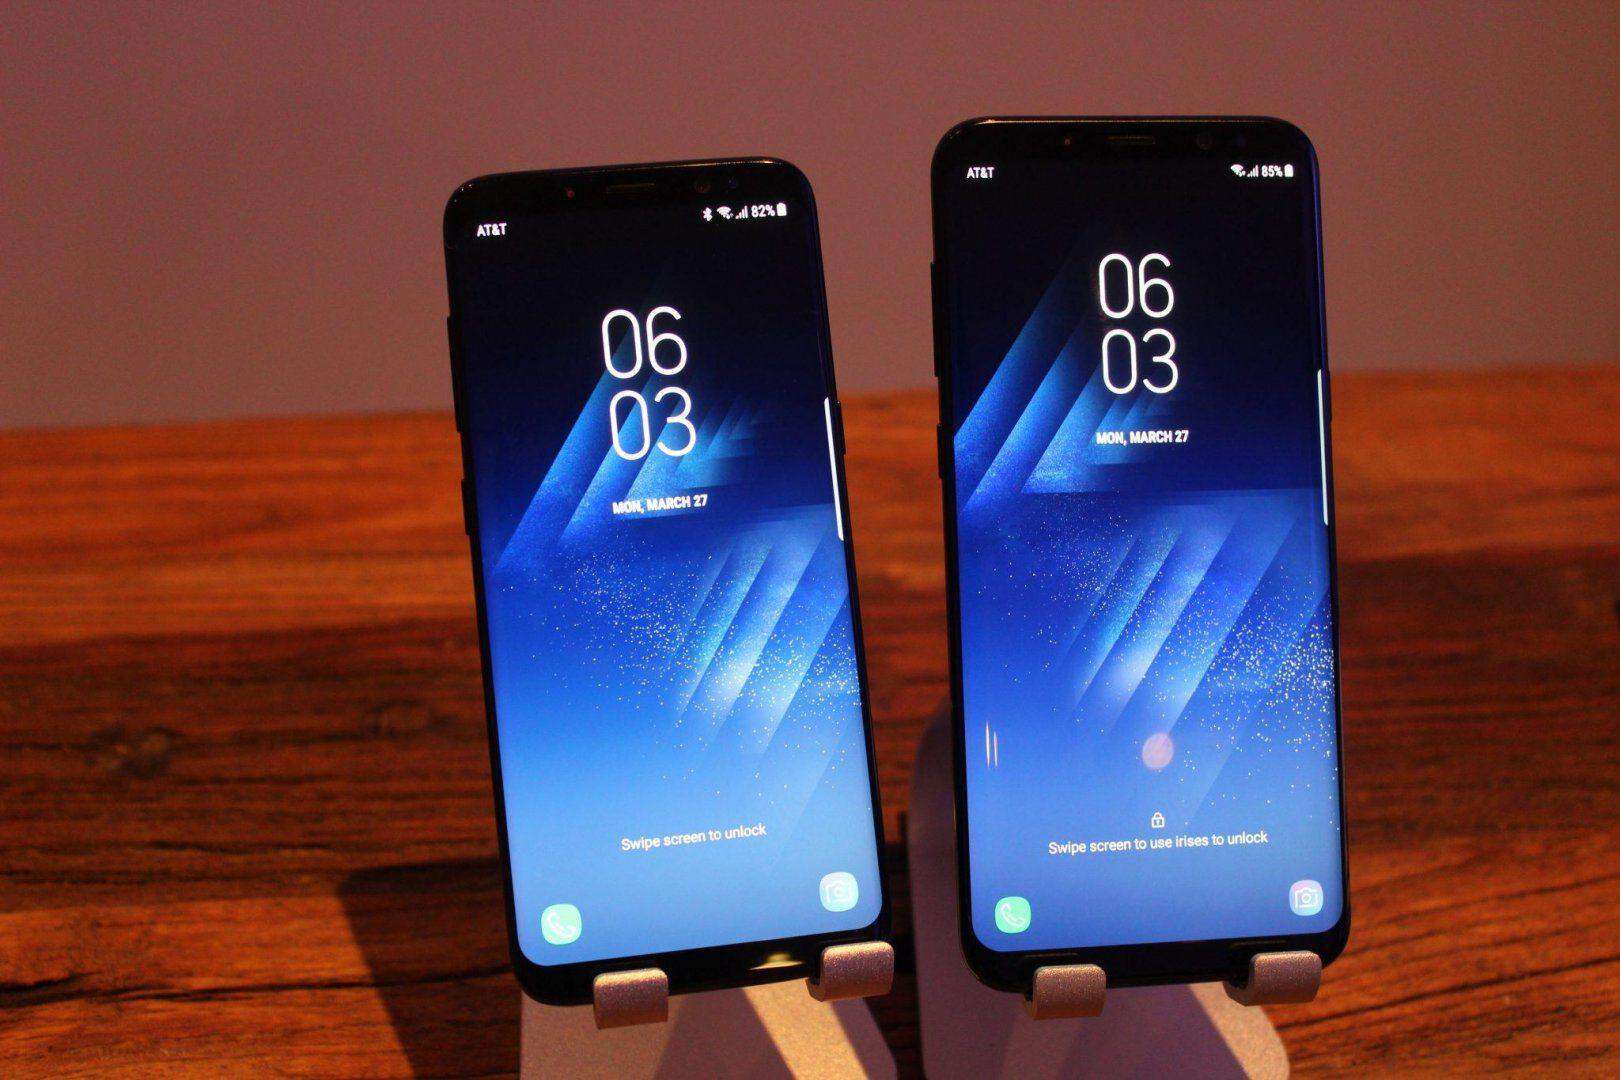 Galaxy S8 and Galaxy S8 Plus